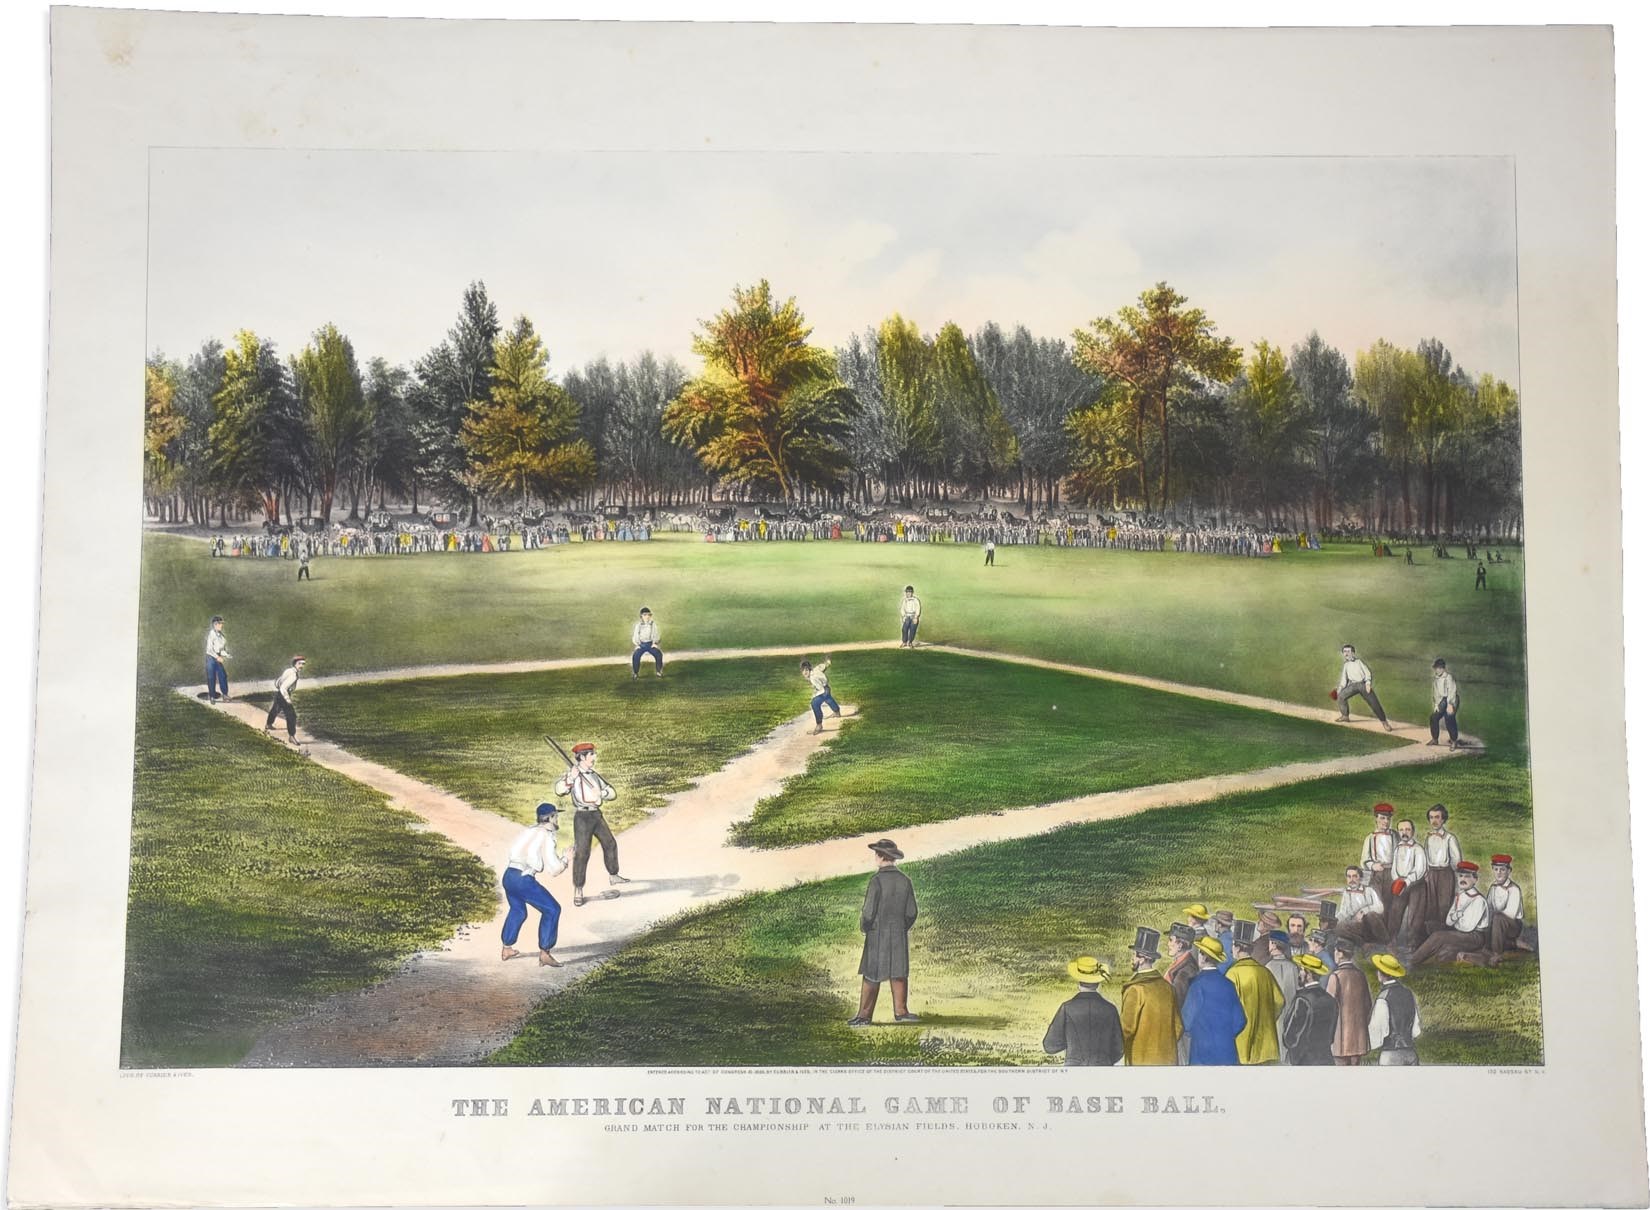 Early Baseball - 1942 Currier & Ives Baseball Restrike by Andres Inc of NY